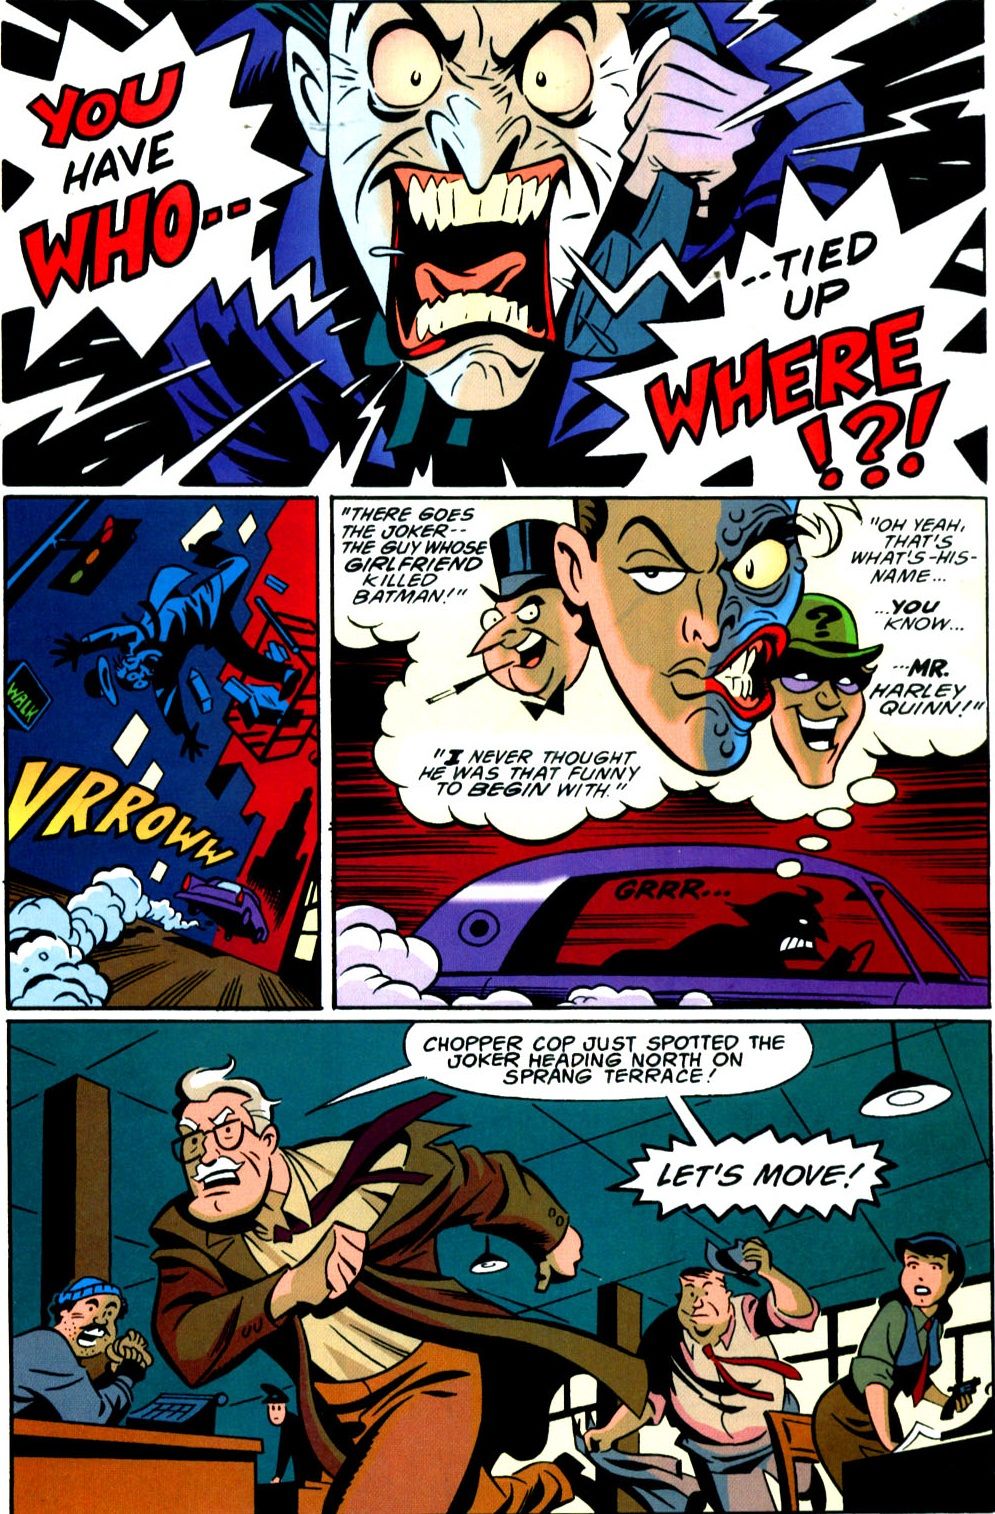 The Joker is shocked to learn that Harley might kill Batman